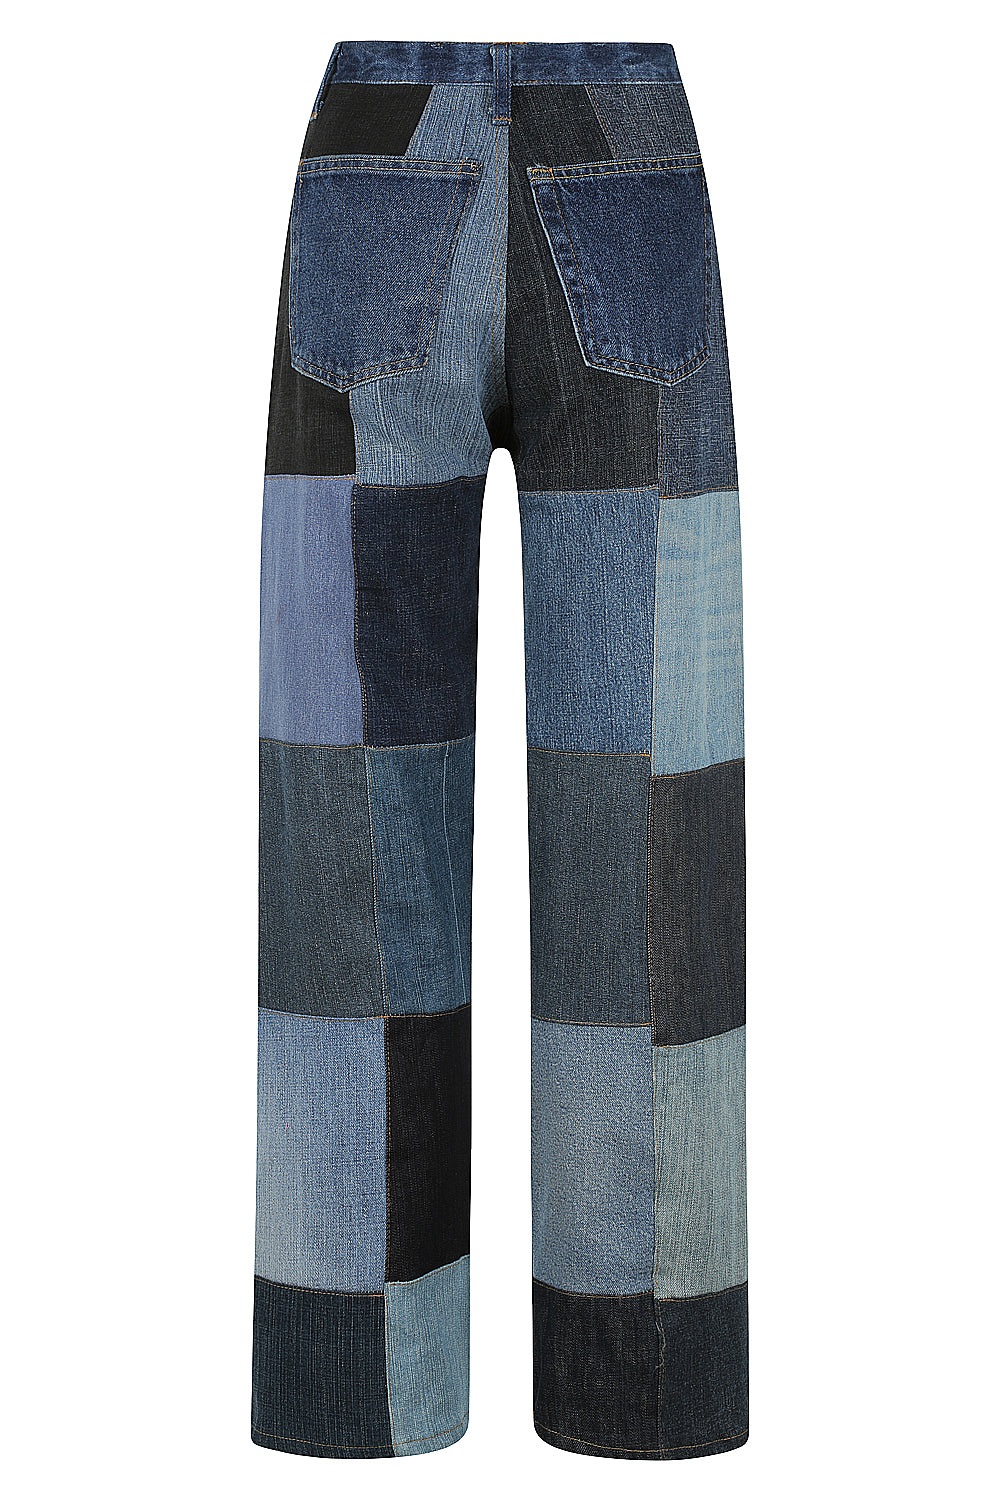 CALCA WIDE LEG PATCHWORK - Bfly Store